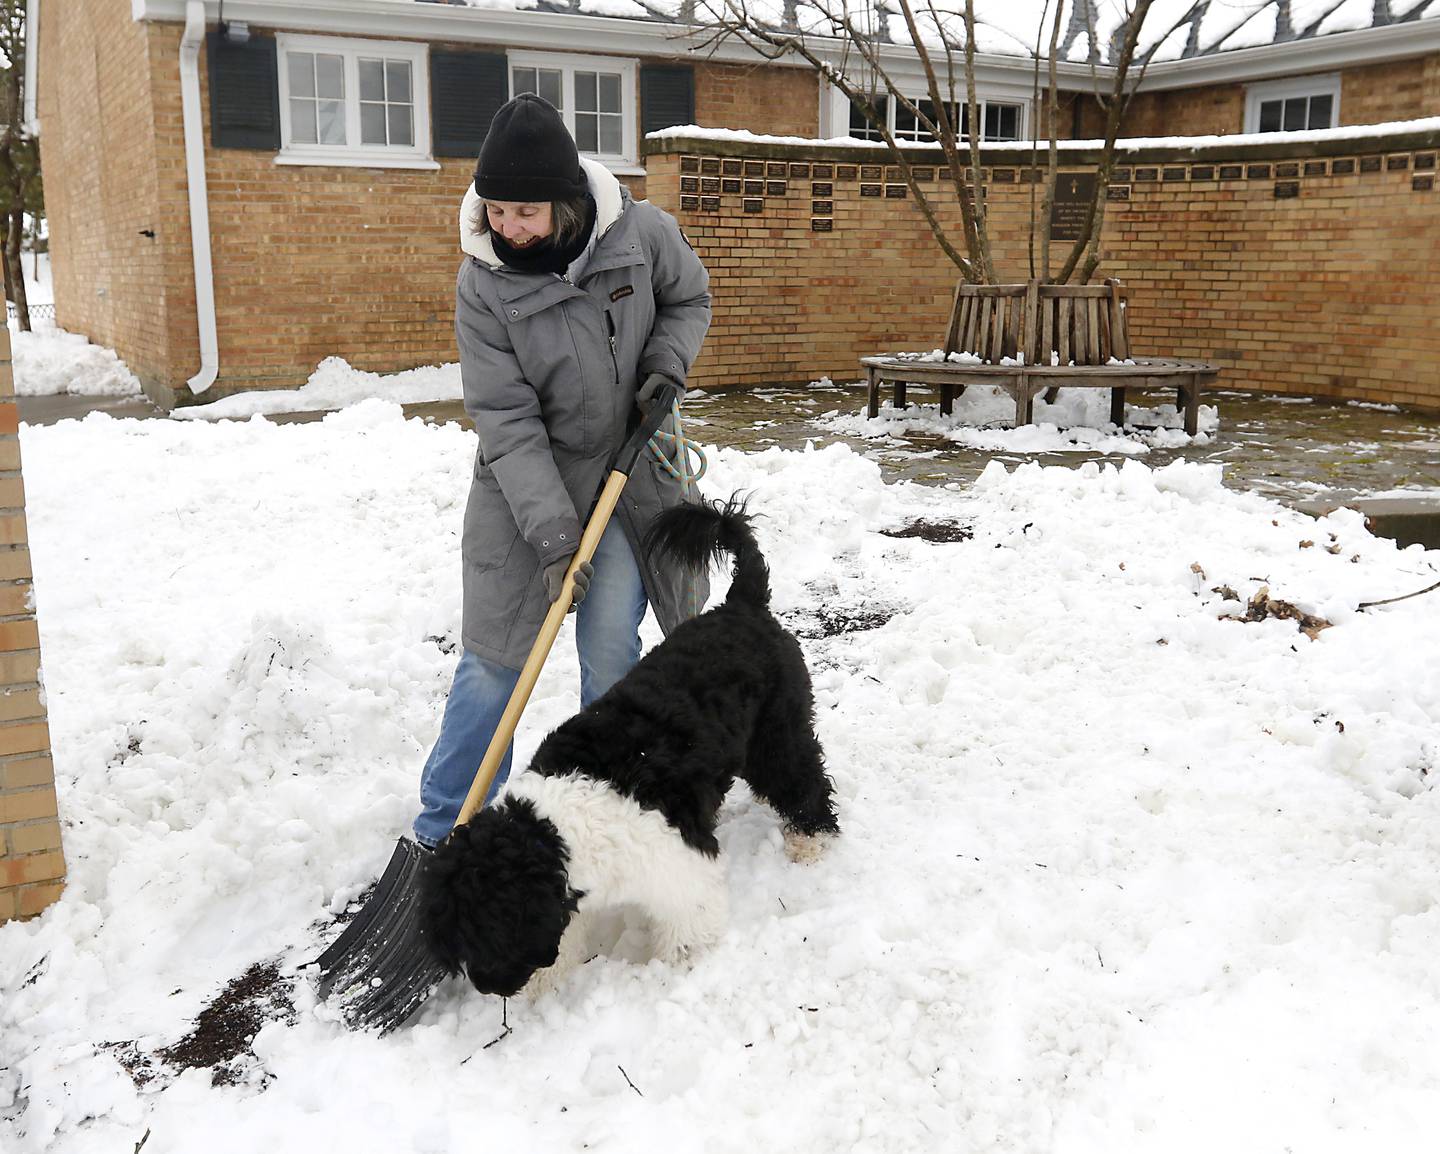 Quincy helps Cynthia Echols shovel a path by picking up a stick at in the memorial garden at St. Ann’s Church on Jackson Street in Woodstock on Friday, March 10, 2023.  Woodstock had one of the highest snow totals from the winter storm that rolled through Thursday afternoon into Friday morning, according to the National Weather Service in Romeoville.
Snow totals throughout northern Illinois ranged from a half-inch reported in Batavia to 9.6 inches in Bull Valley, NWS Meteorologist Zachary Yack said.